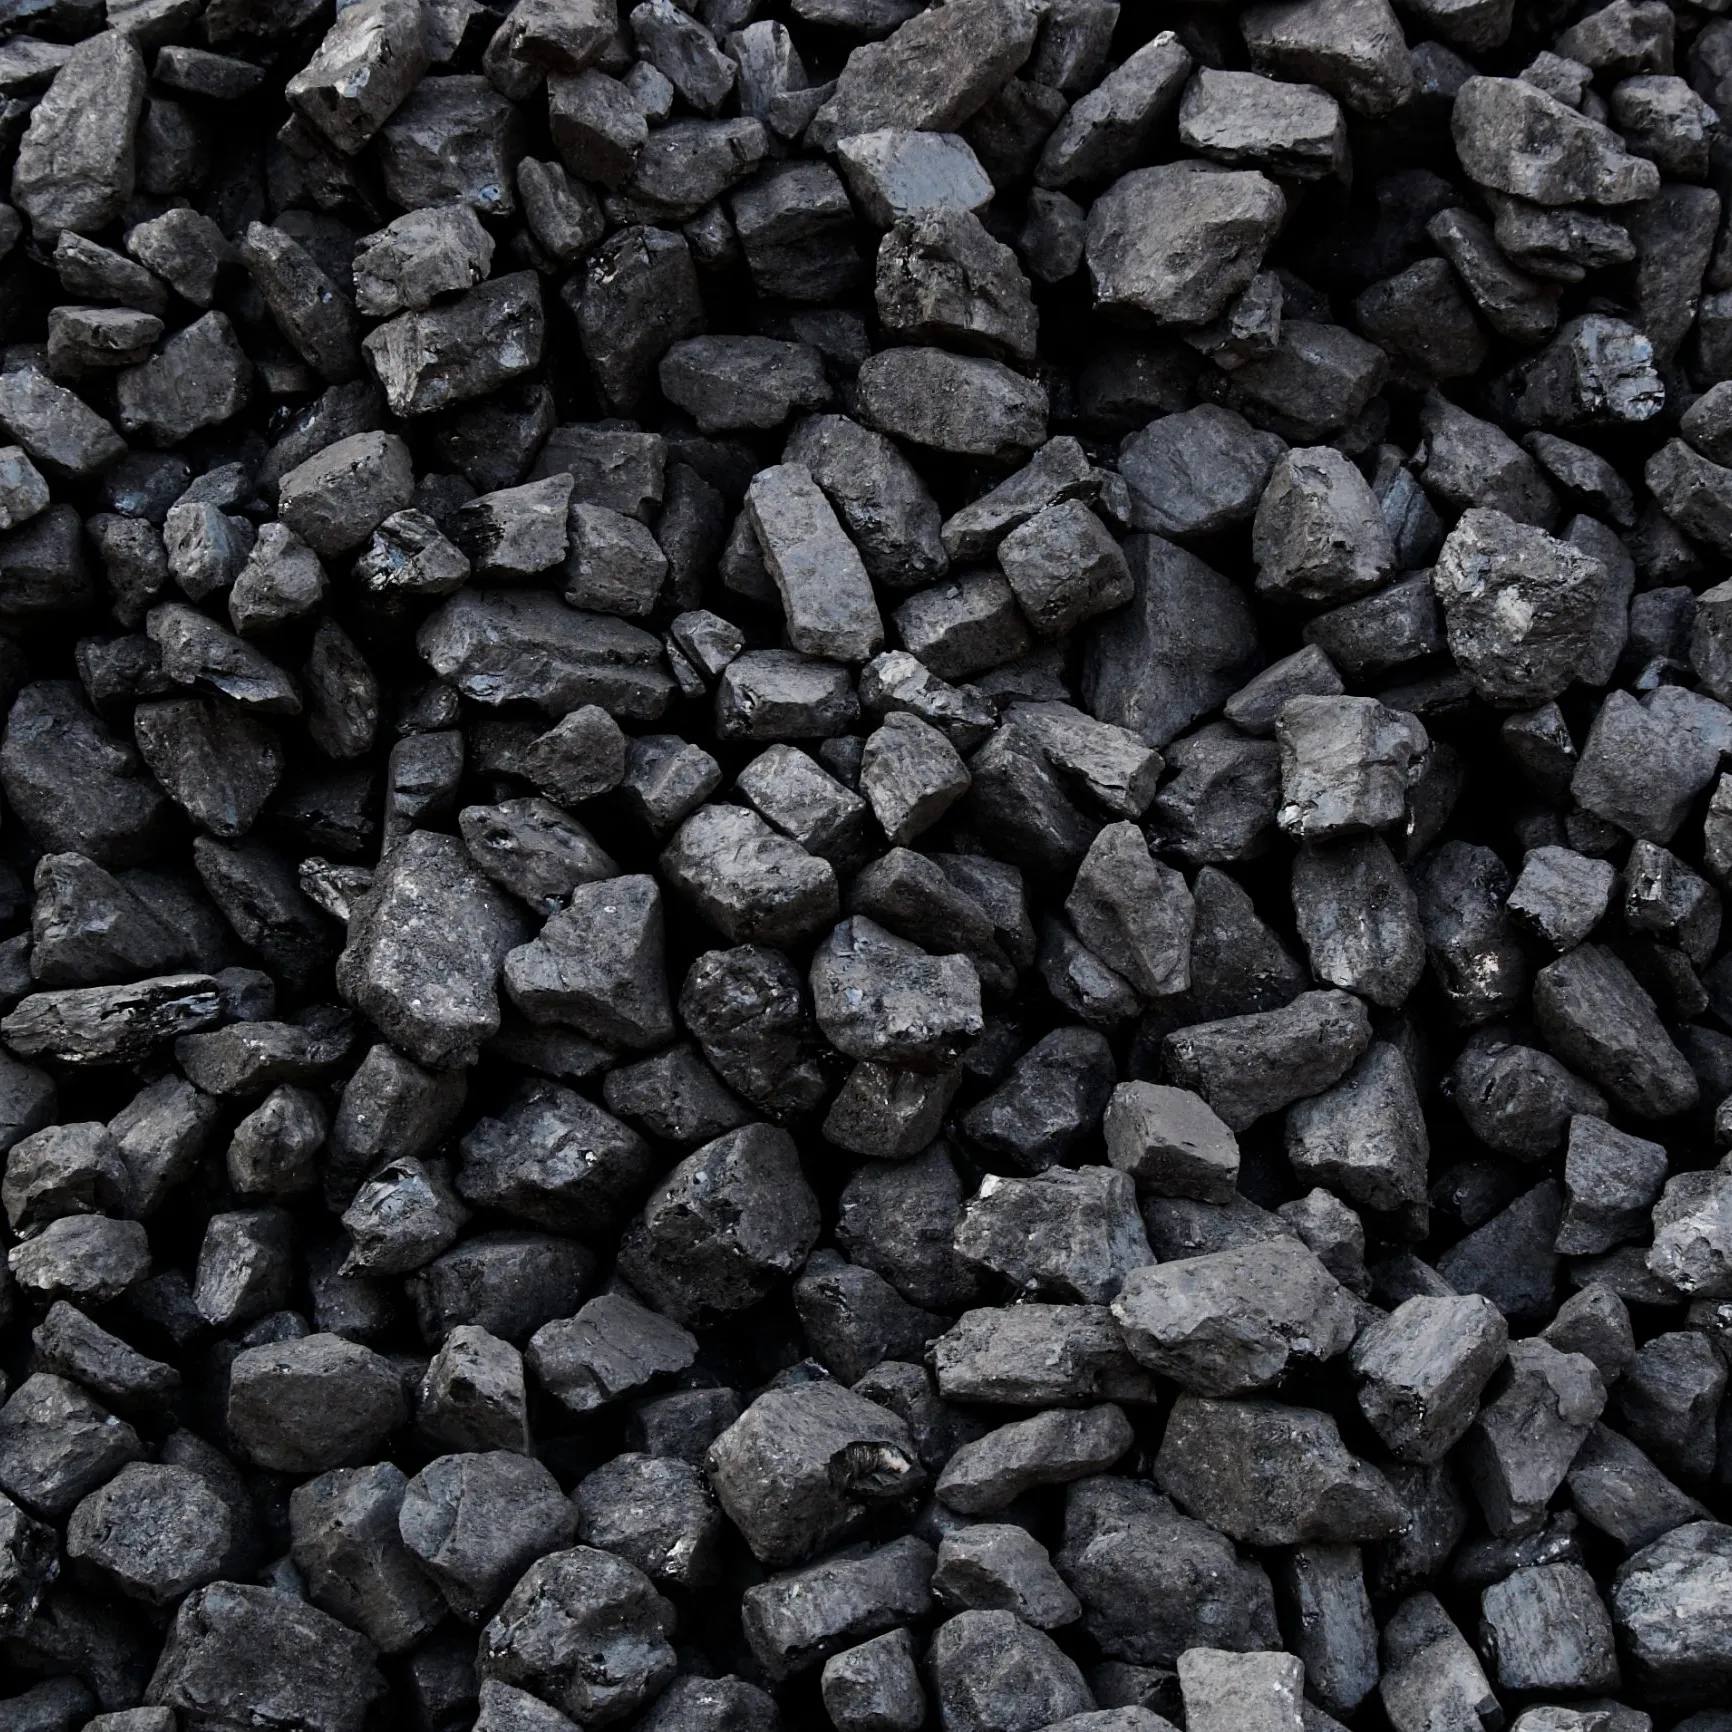 Indonesia Steam Coal Tar for Cooking or Industrial